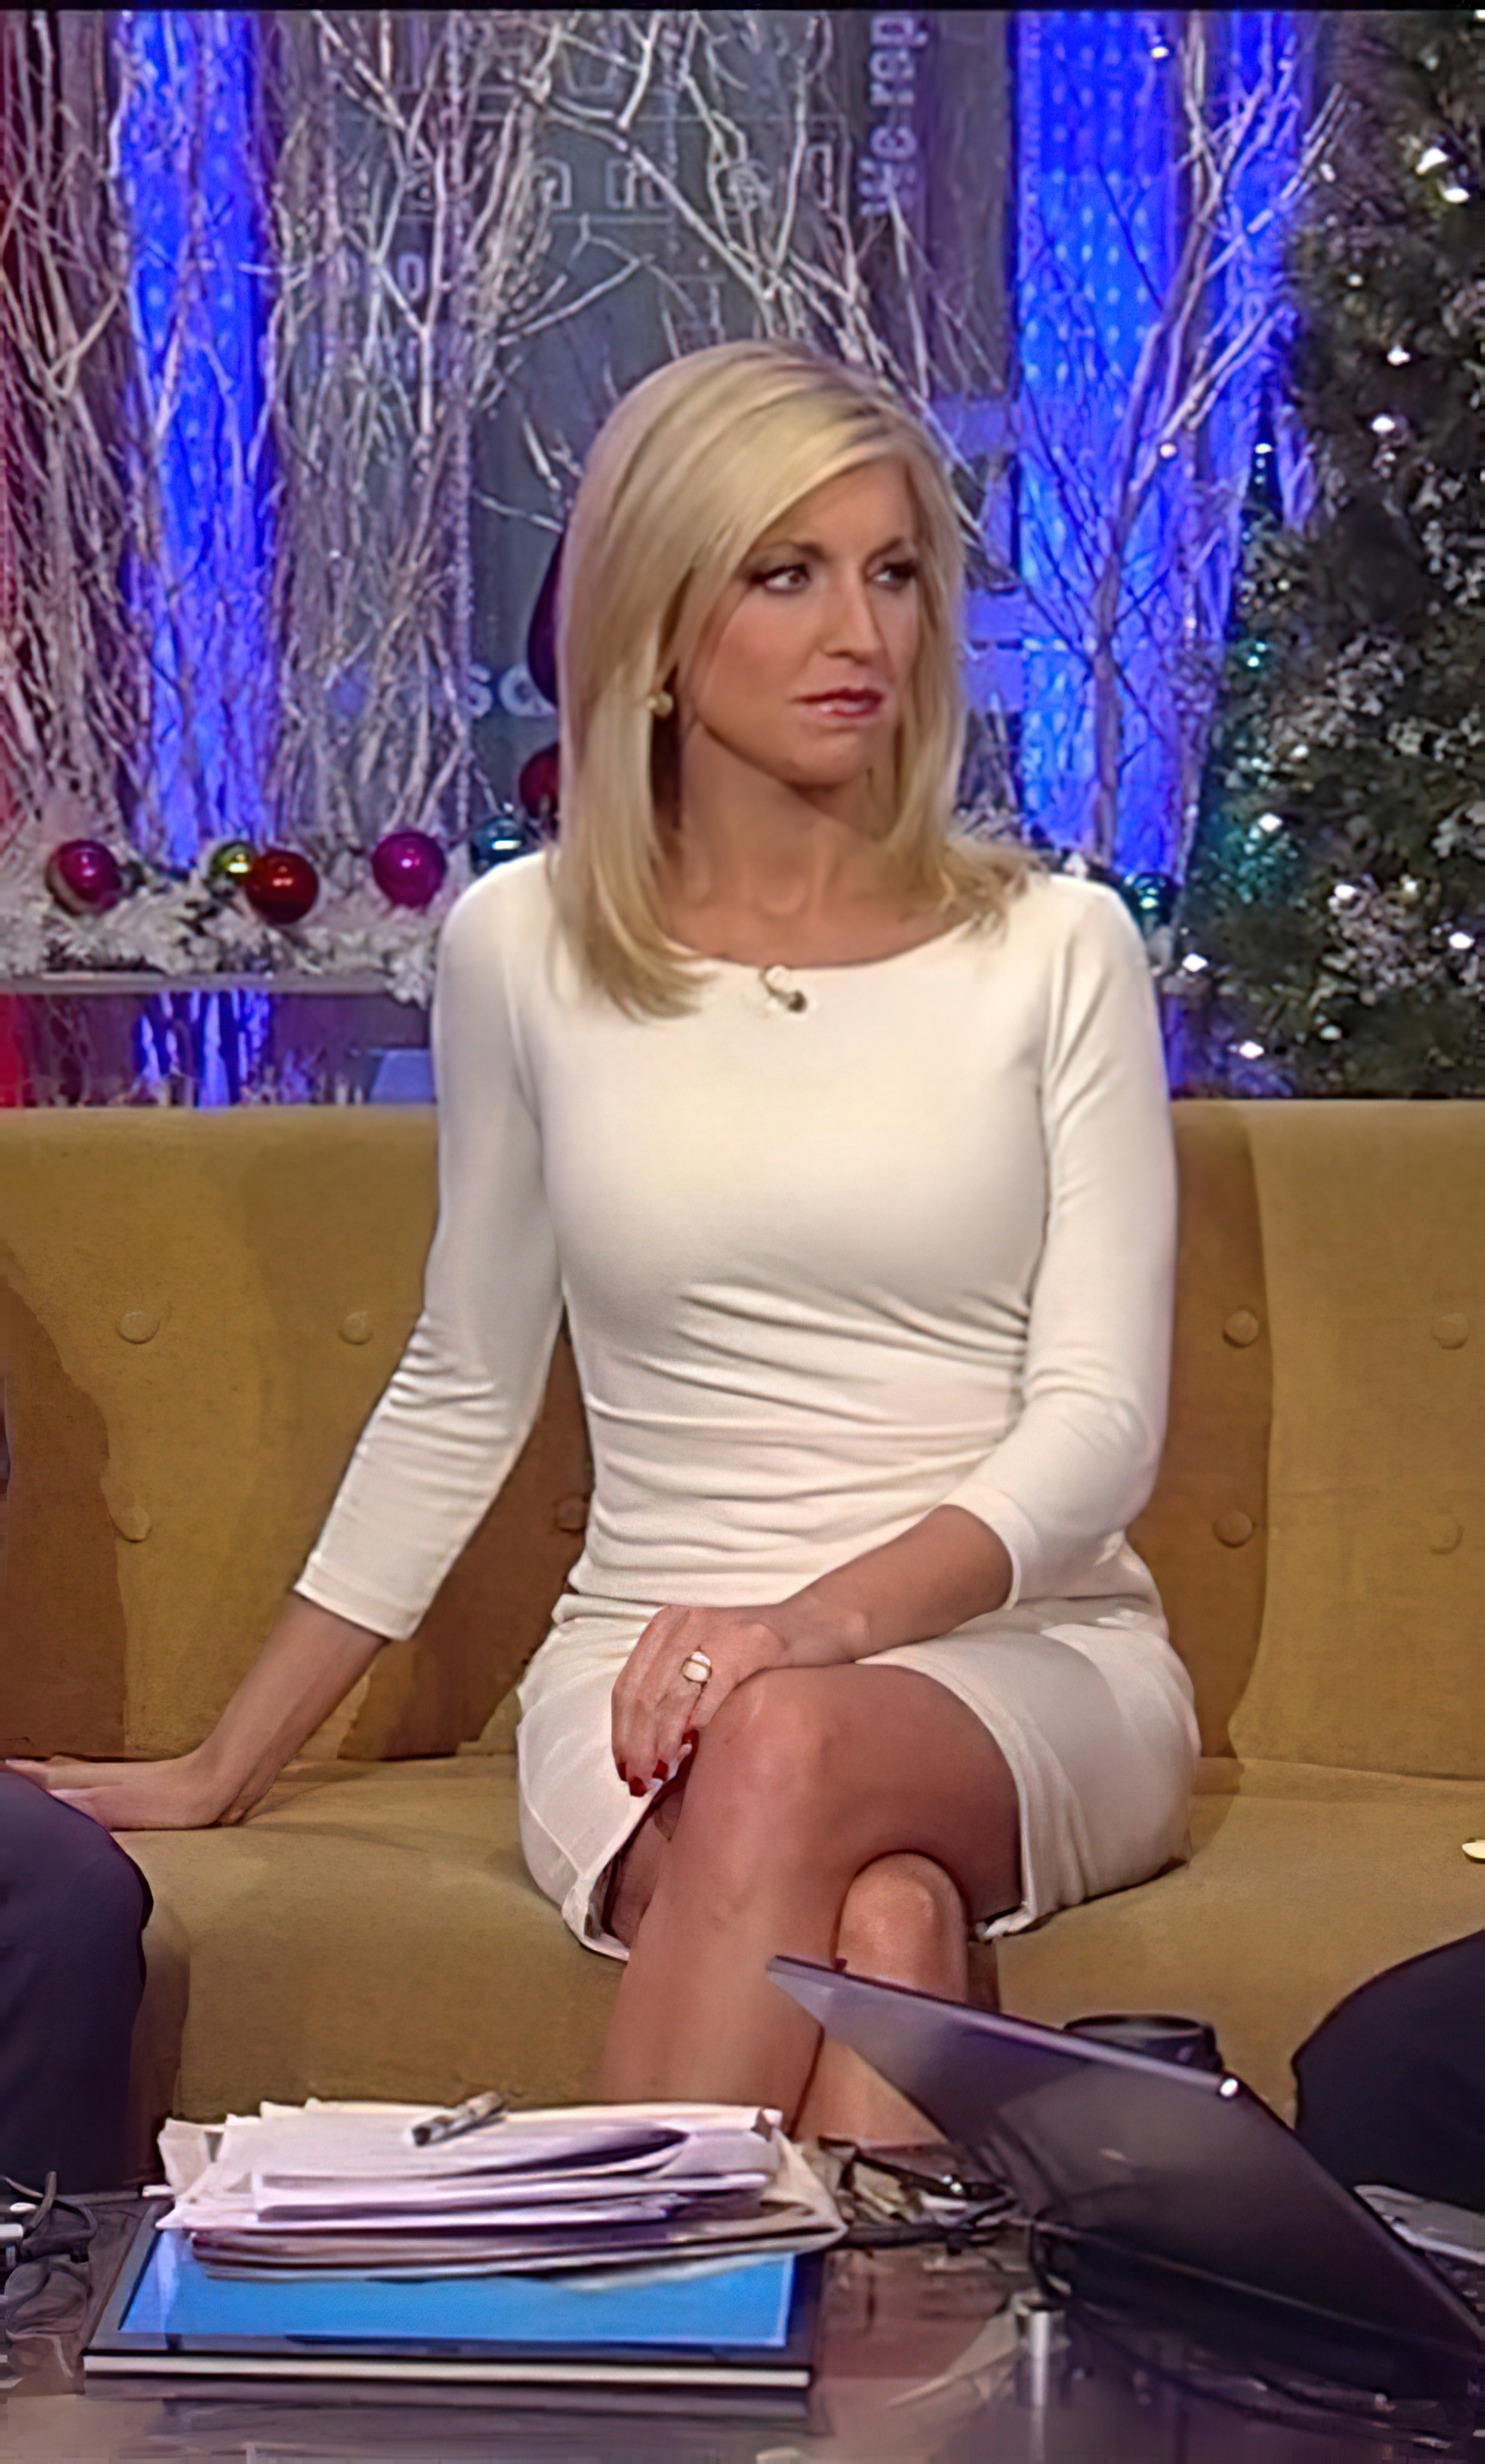 dianne white allen recommends ainsley earhardt nude pics pic